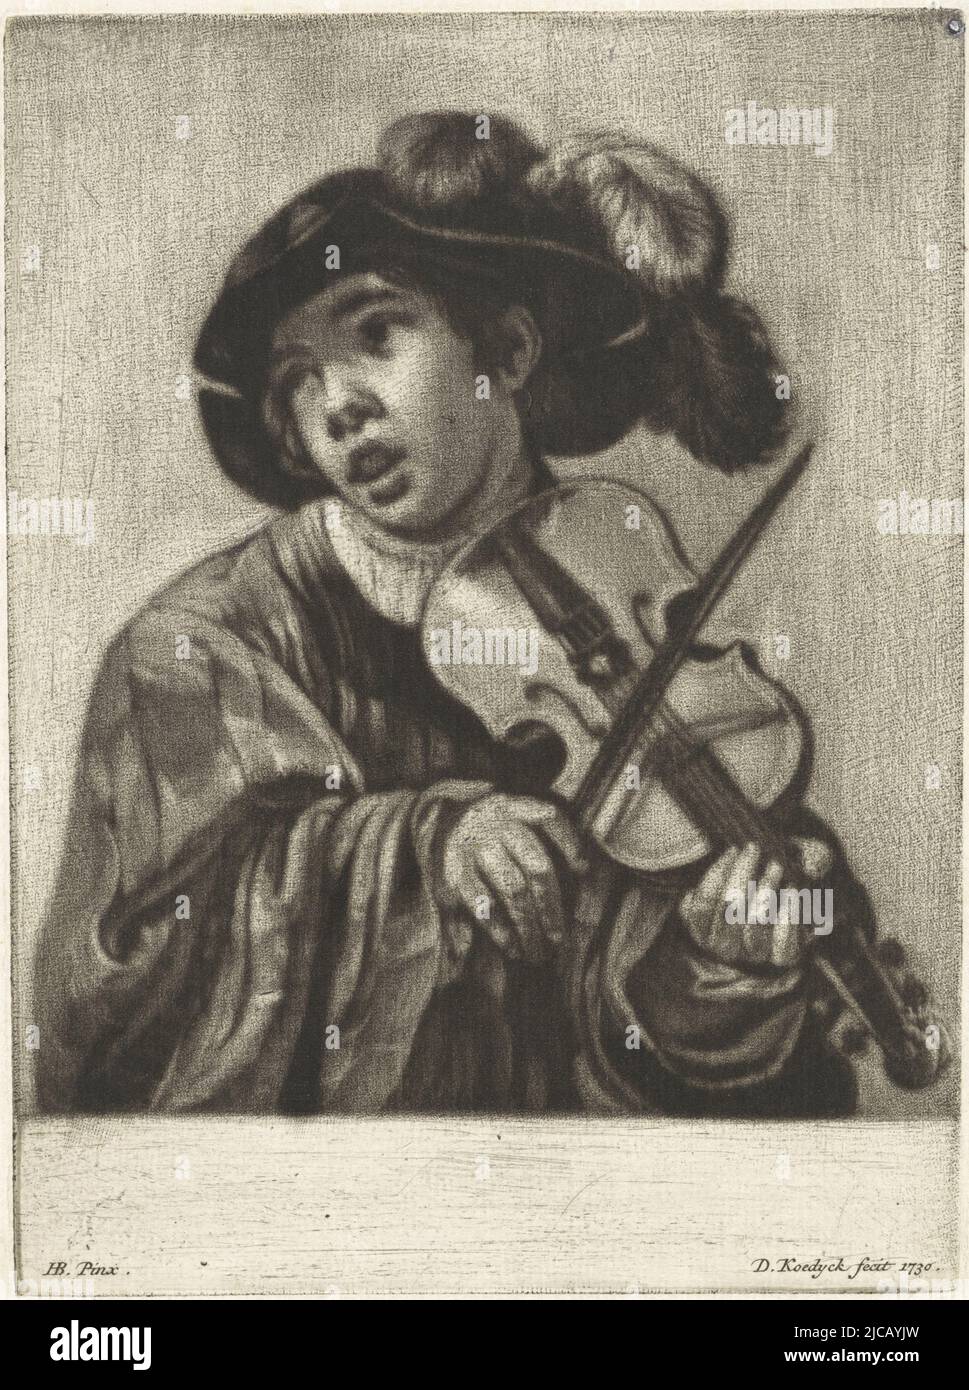 A boy, wearing a feathered hat on his head, plays a violin, Violin Player, print maker: Dirk Koedijck, (mentioned on object), after: Hendrick ter Brugghen, (mentioned on object), Zaandam, 1730, paper, engraving, h 168 mm × w 125 mm Stock Photo